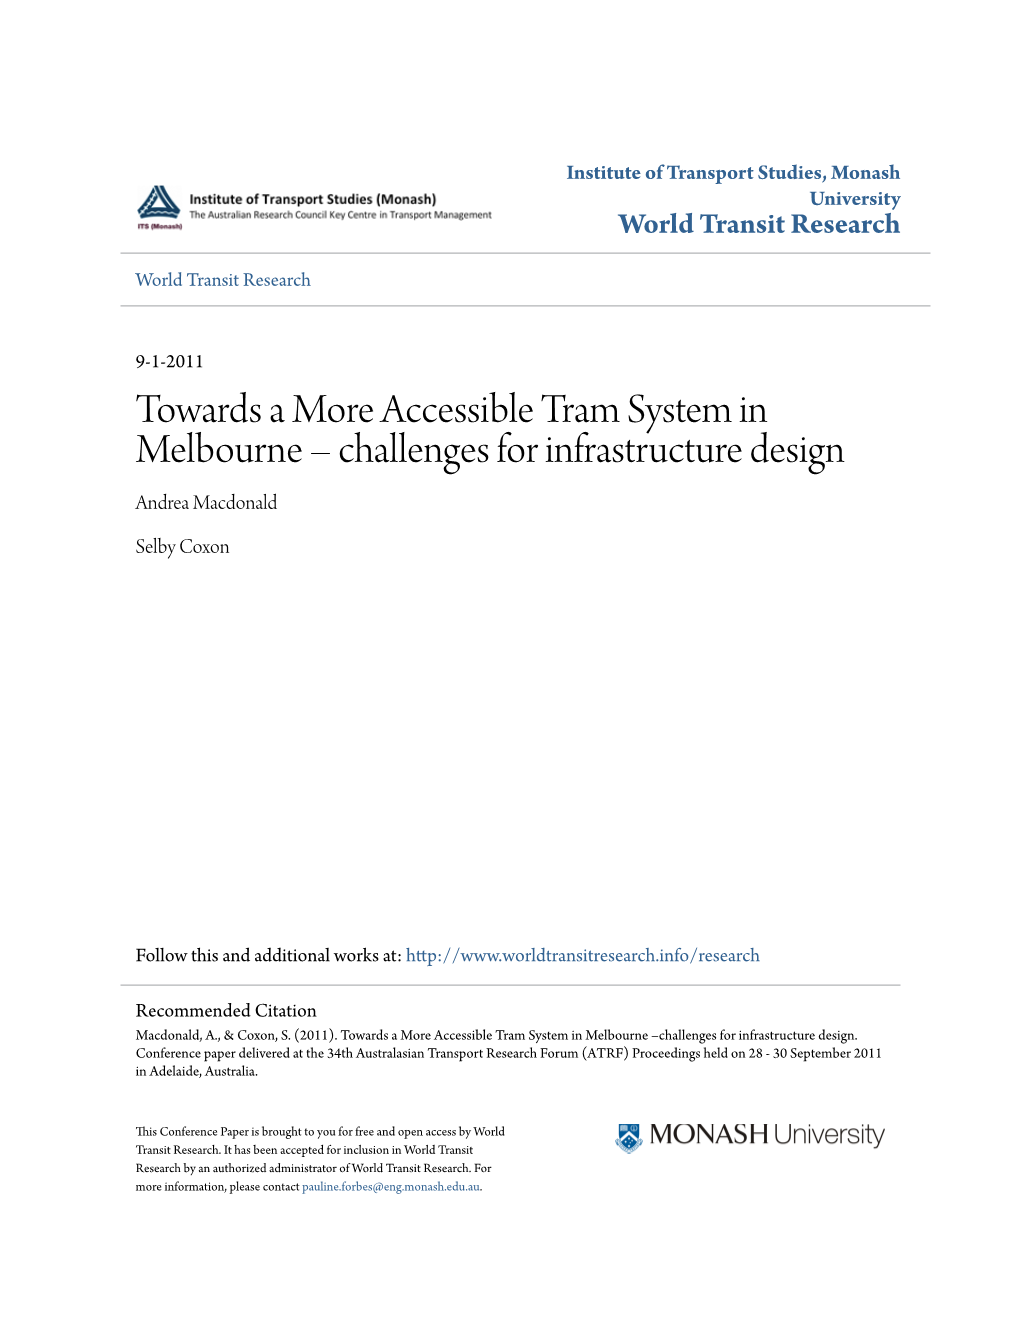 Towards a More Accessible Tram System in Melbourne – Challenges for Infrastructure Design Andrea Macdonald